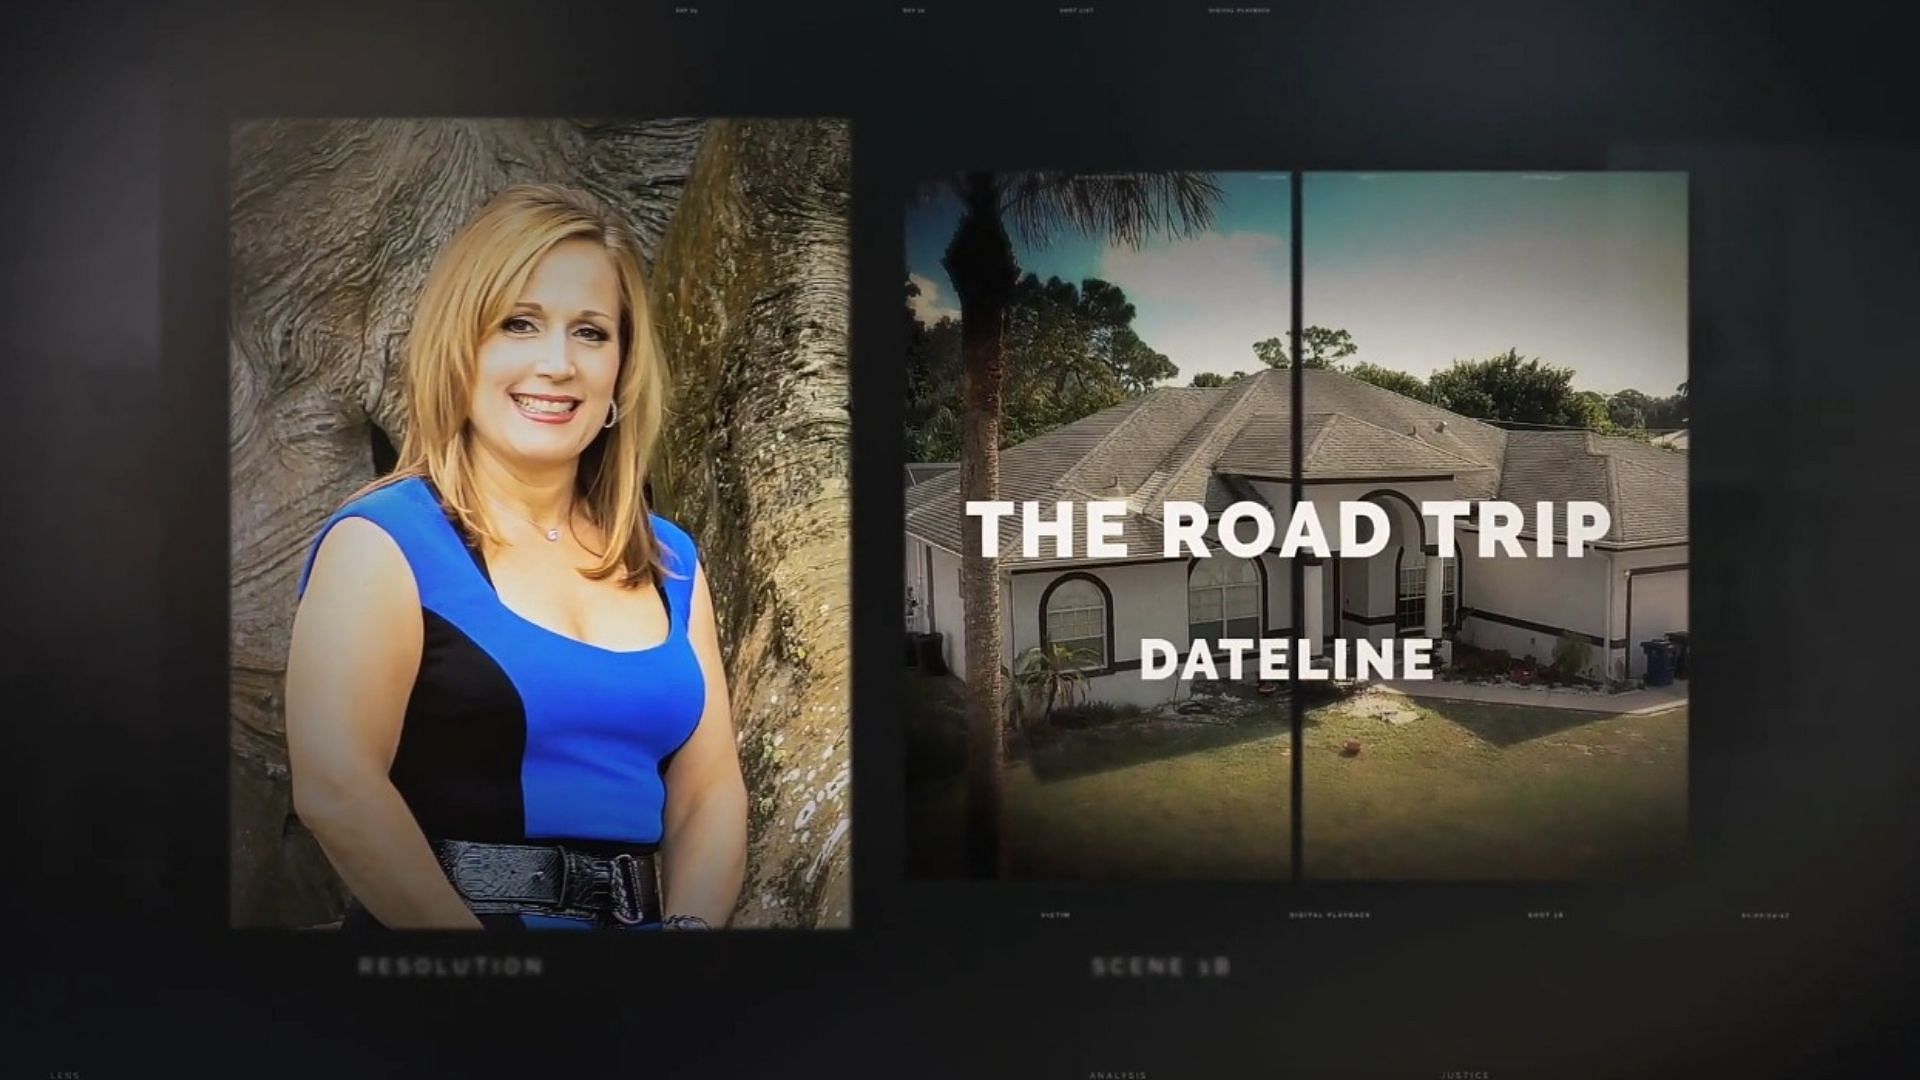 NBC Dateline&rsquo;s episode, titled: &lsquo;The Road Trip&rsquo; is arriving this May 22, 2022 (Image Via Dateline NBC/YouTube)